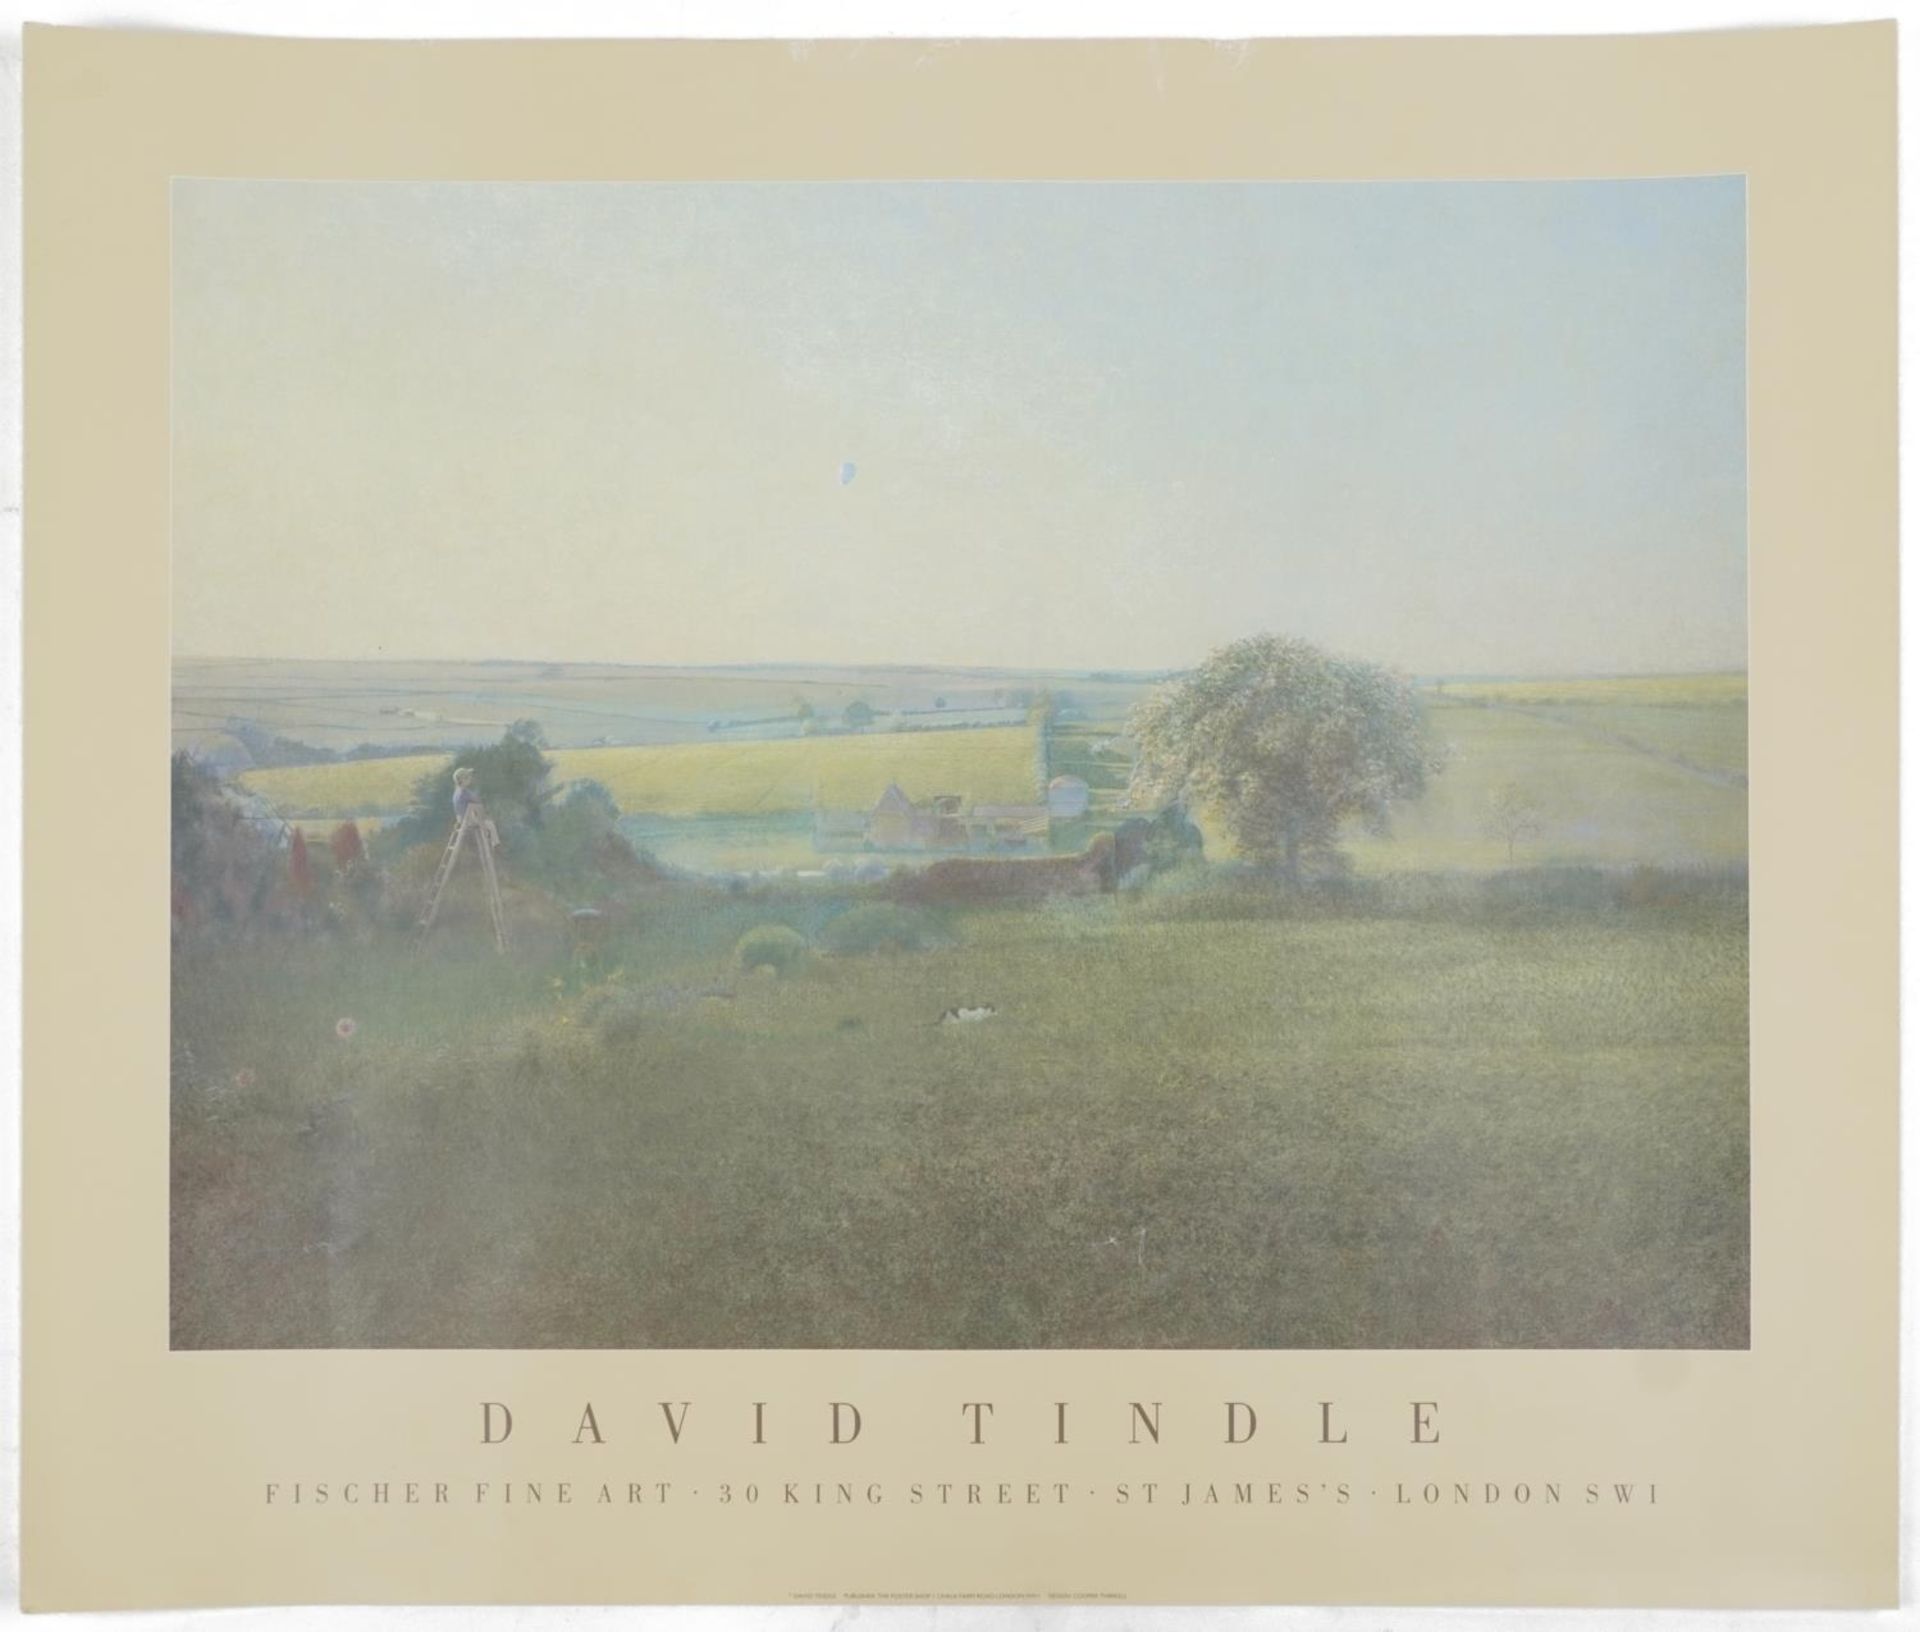 Four David Tindall Fischer Fine Art art posters published by The Poster Shop, each 72cm x 62cm : For - Image 14 of 16